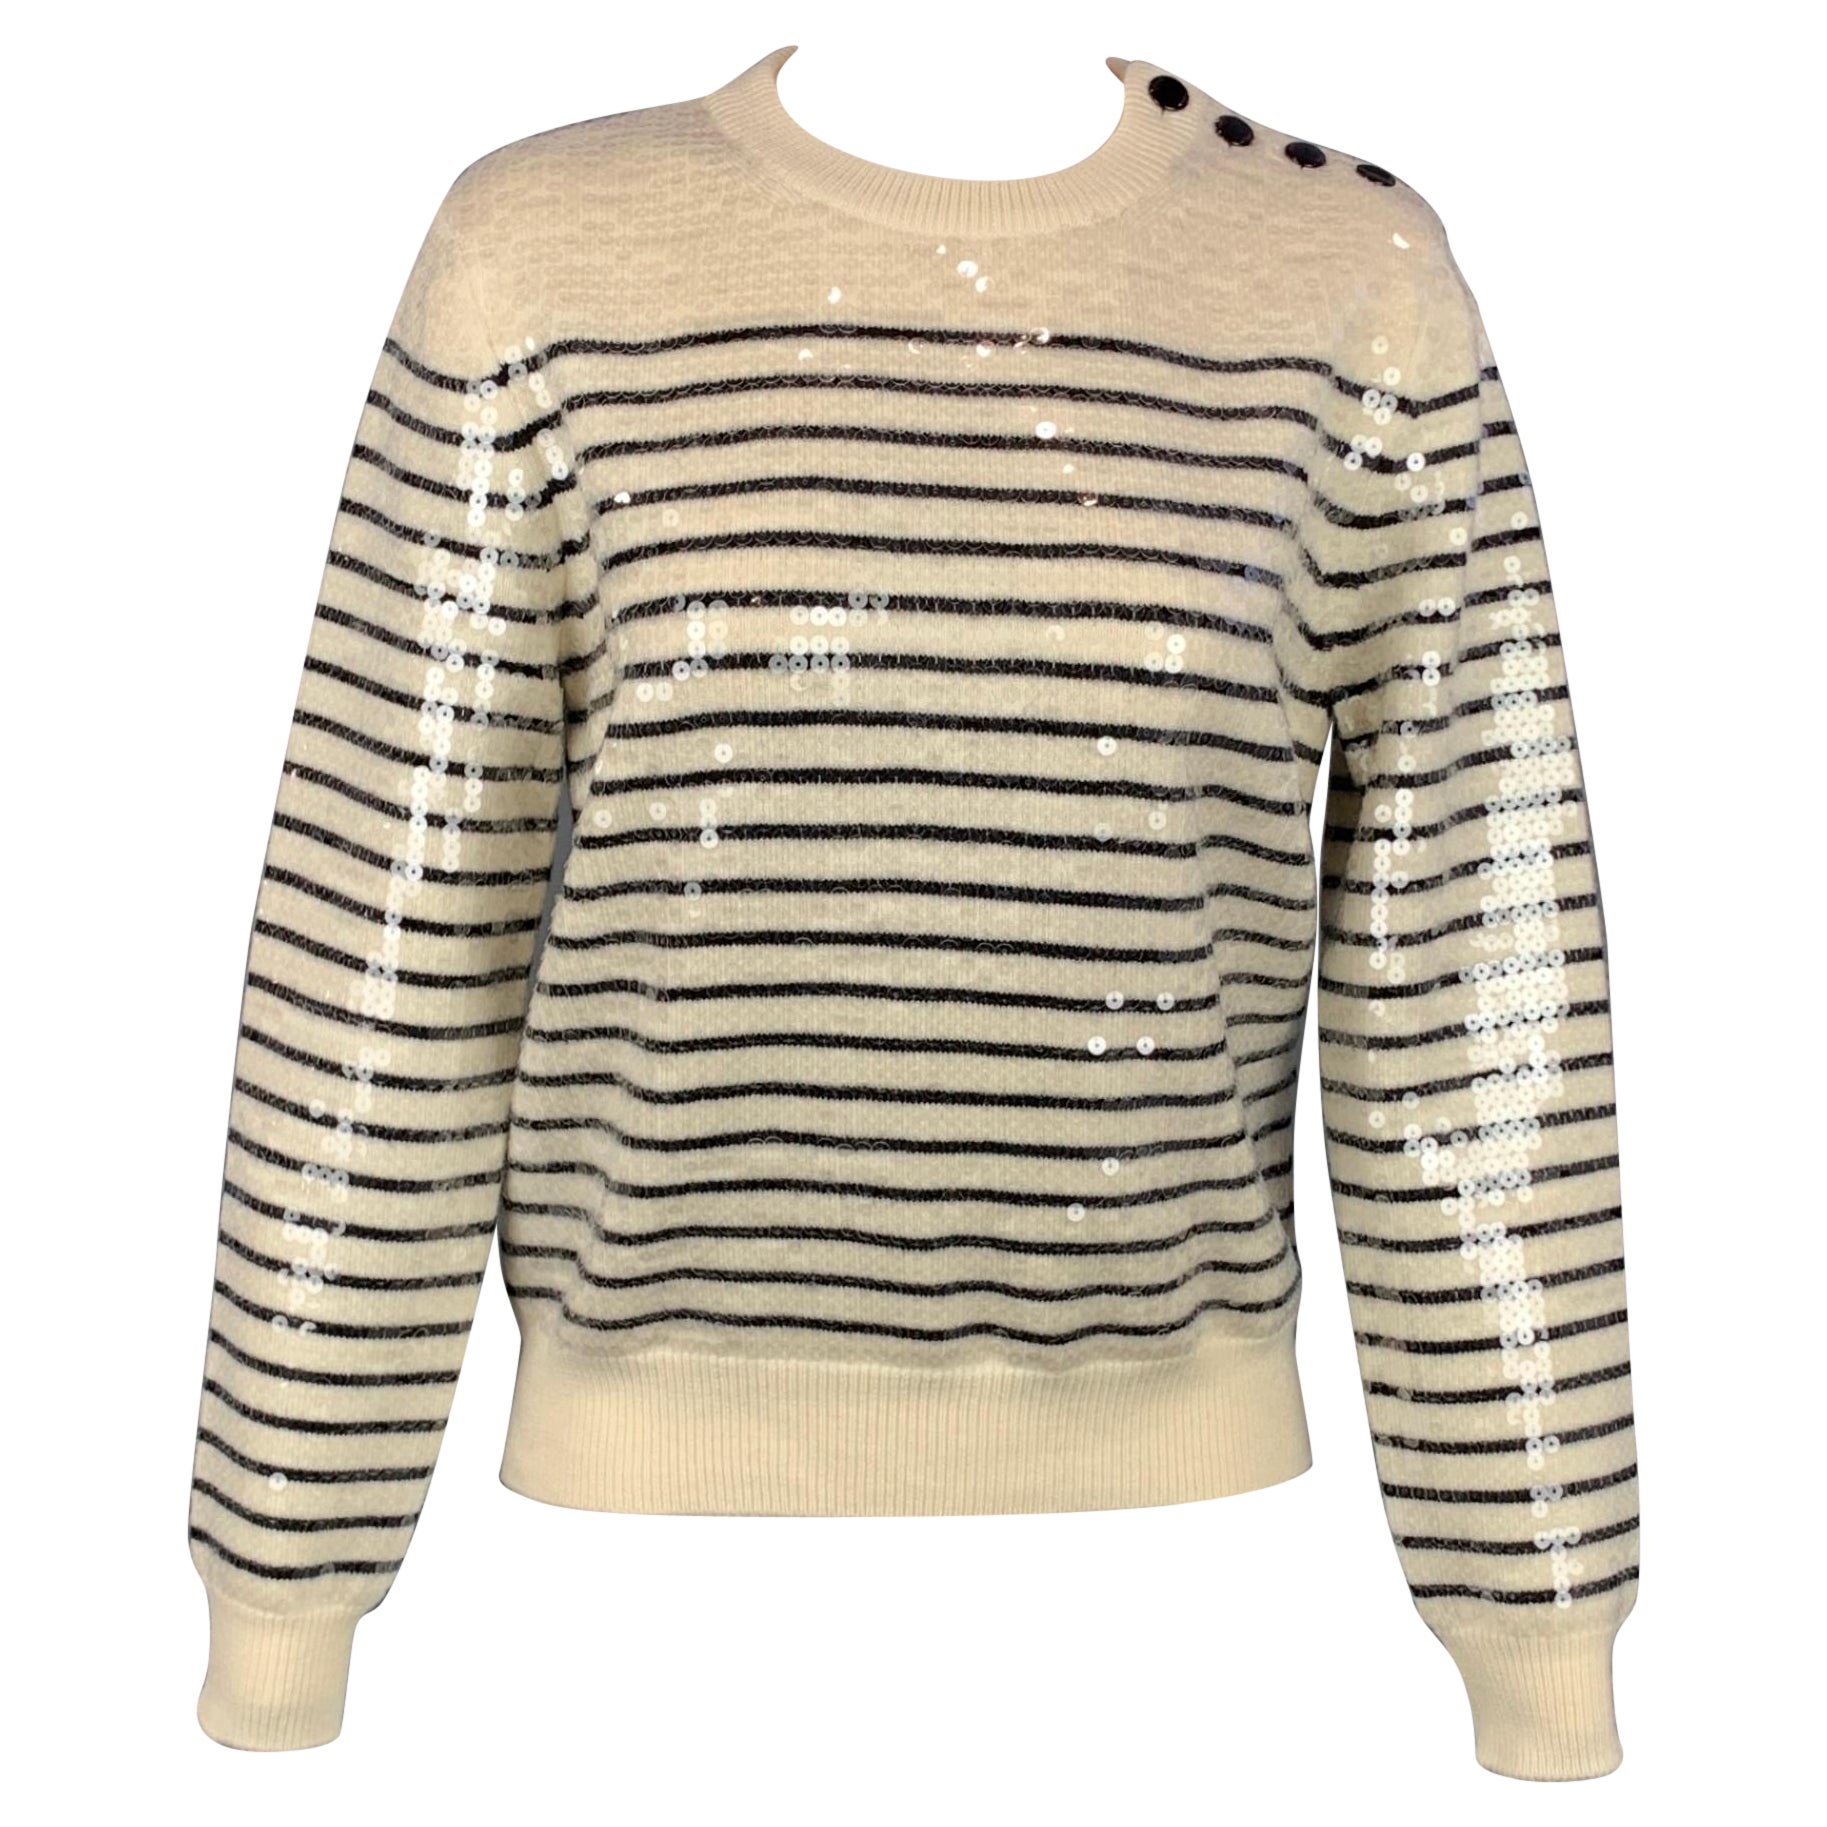 CELINE Size S Cream Sequined Striped Wool Marin Sweater